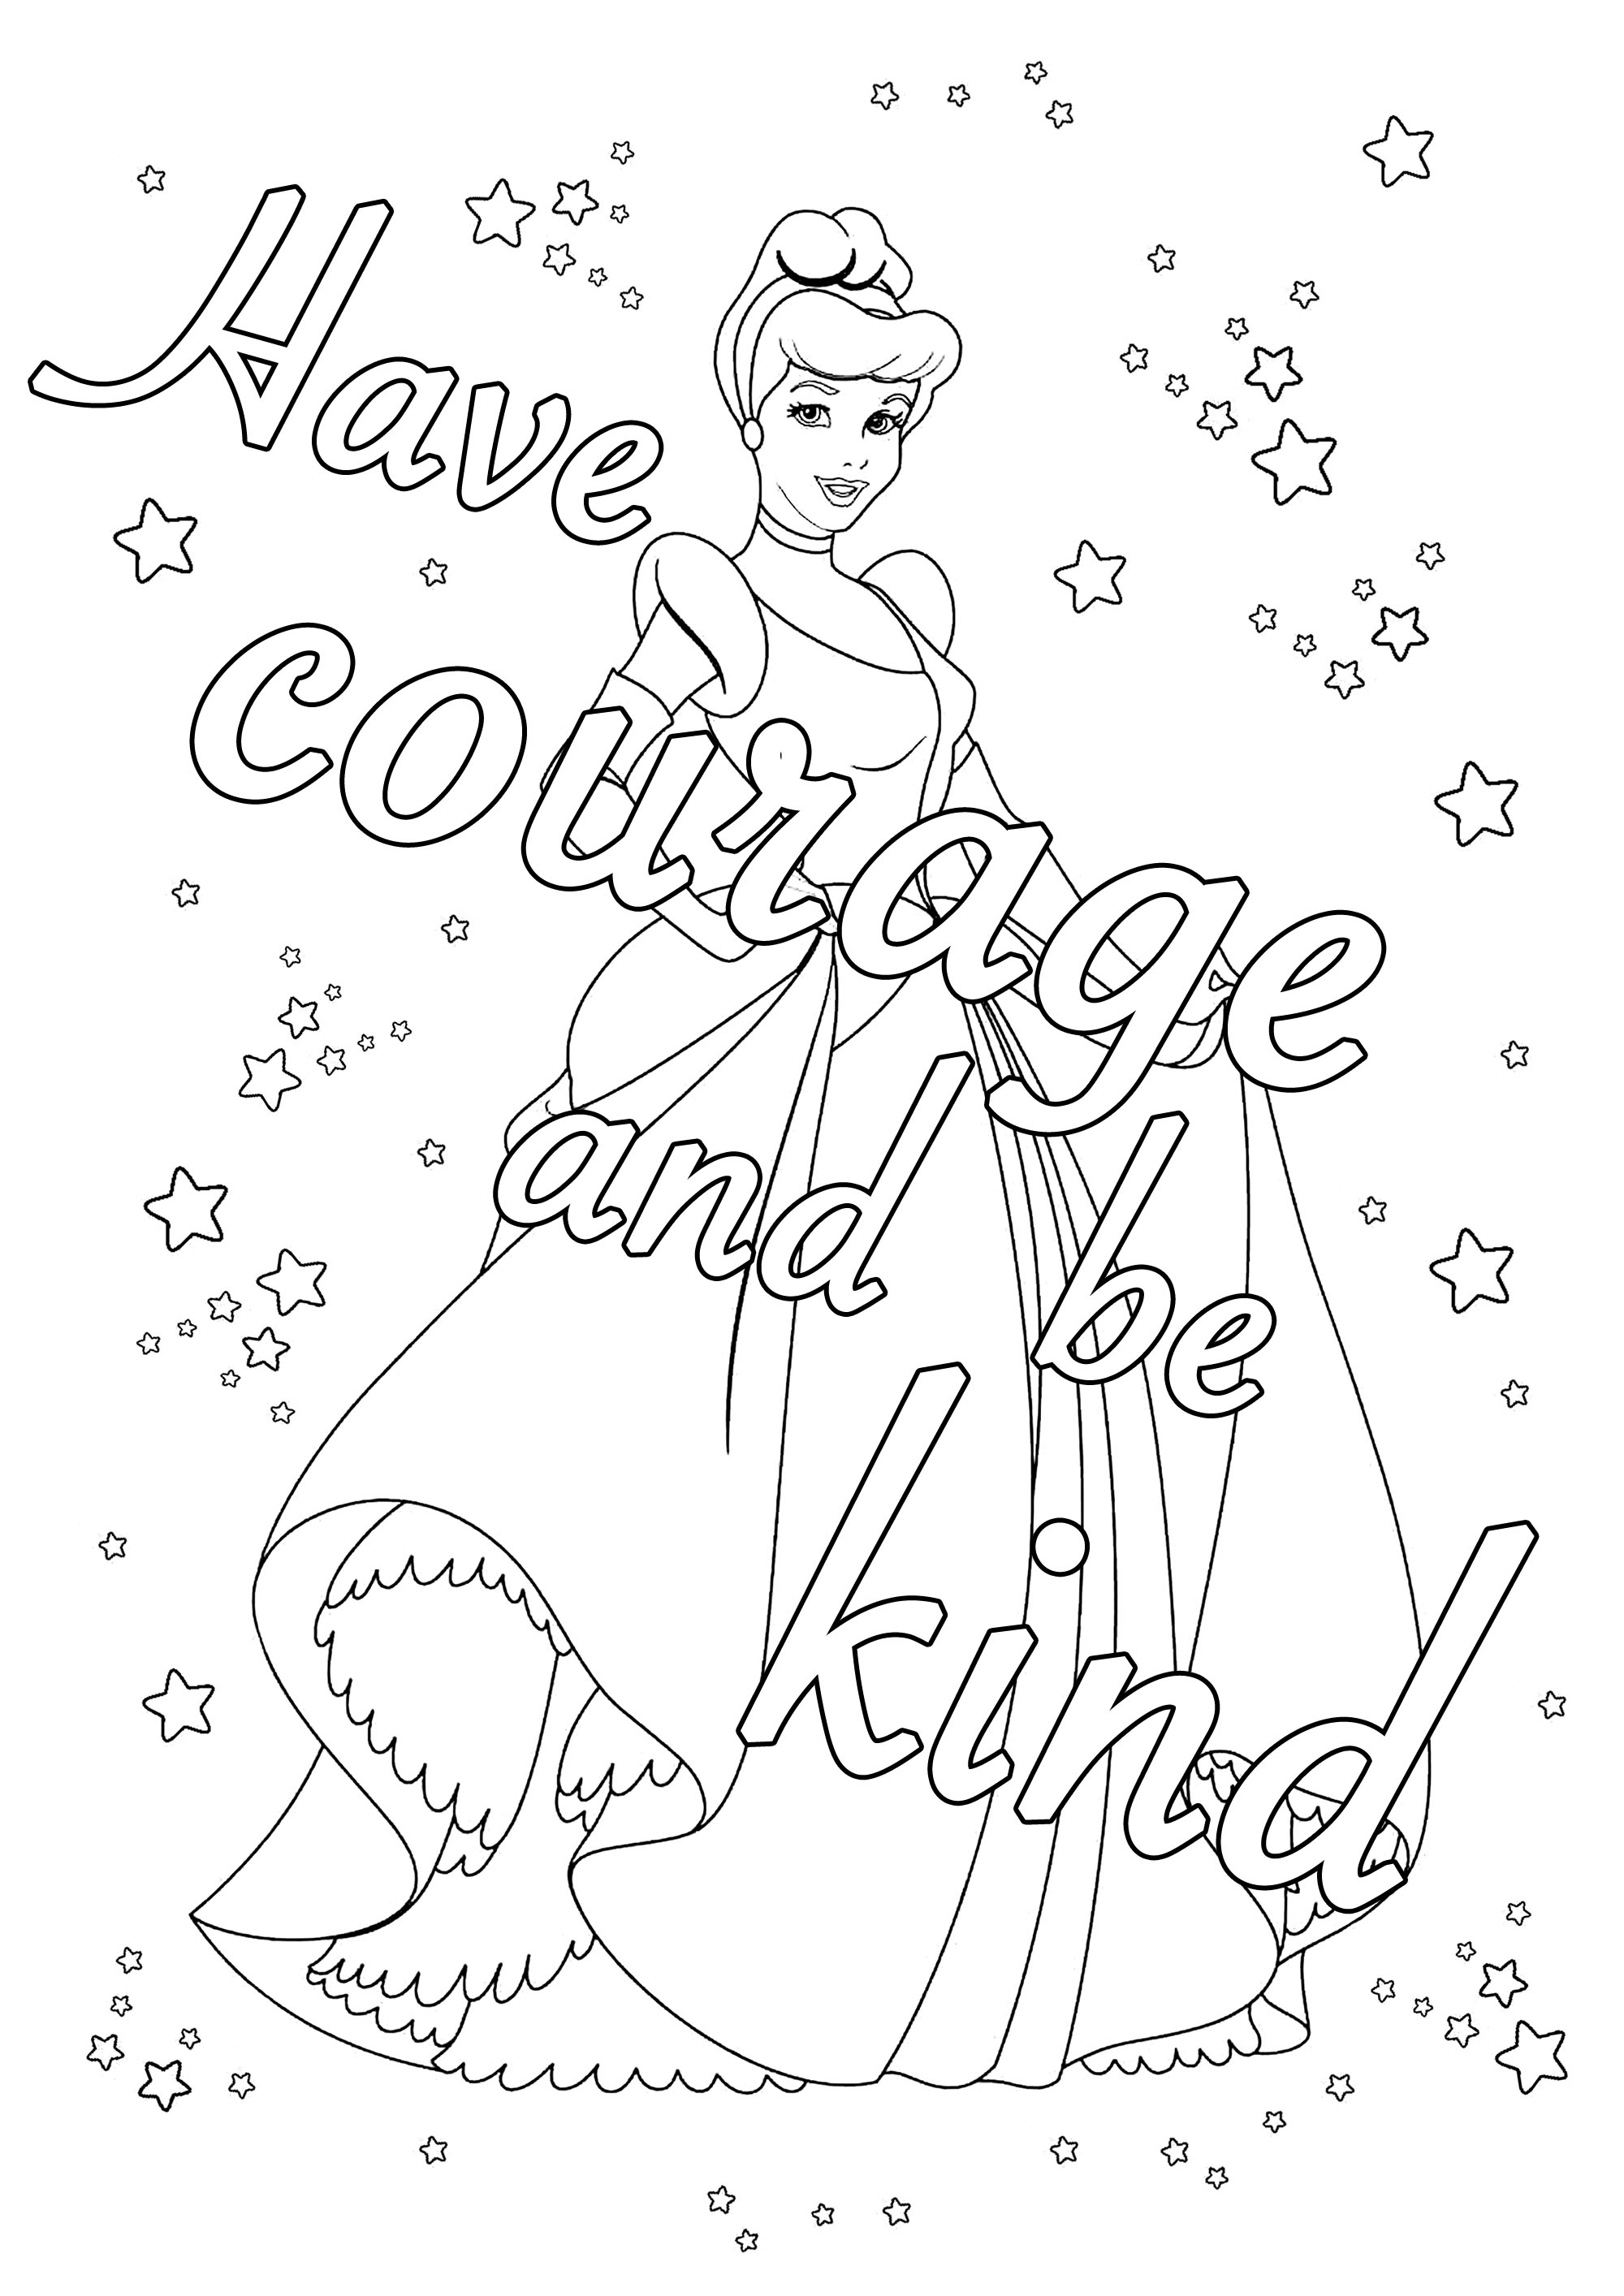 Have courage and be kind (from Cinderella) - Positive & inspiring quotes  Adult Coloring Pages